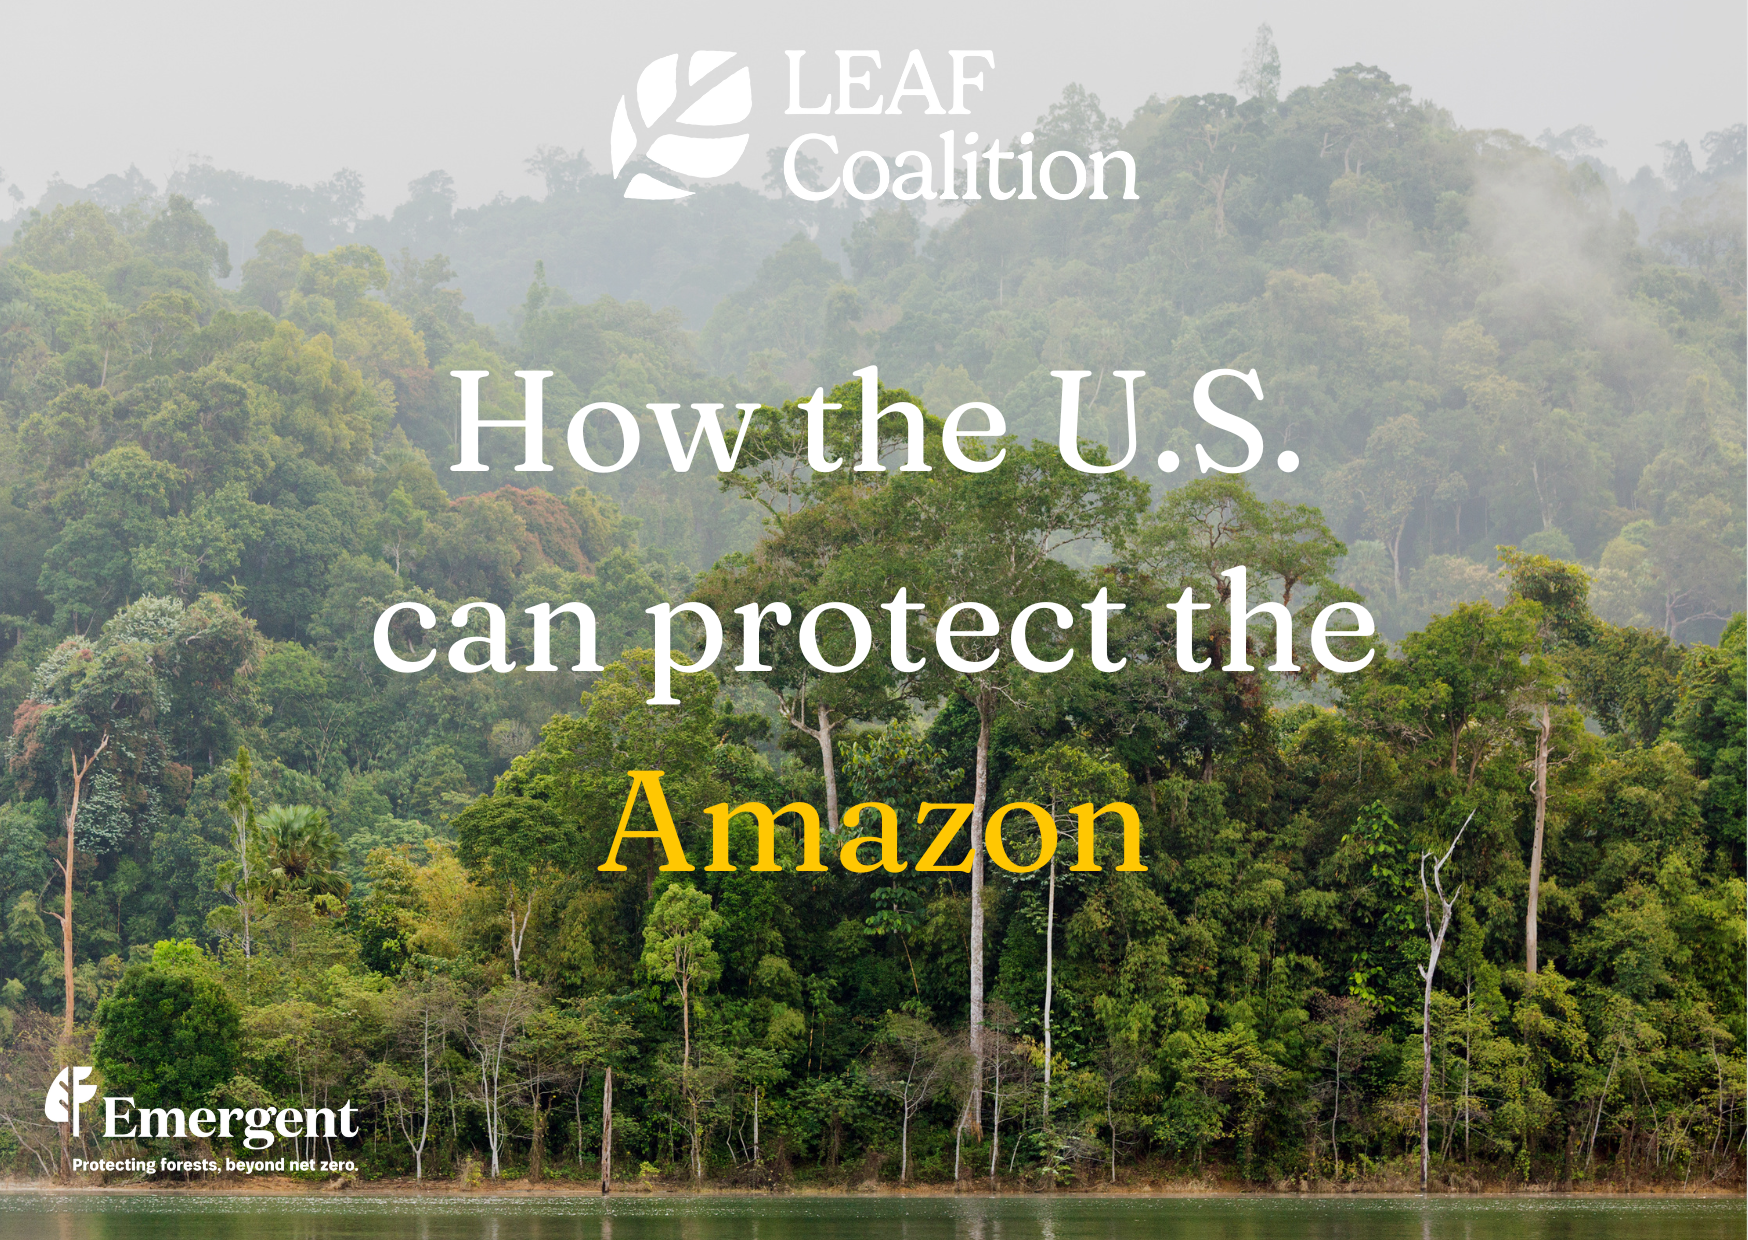 How the U.S. can protect the Amazon